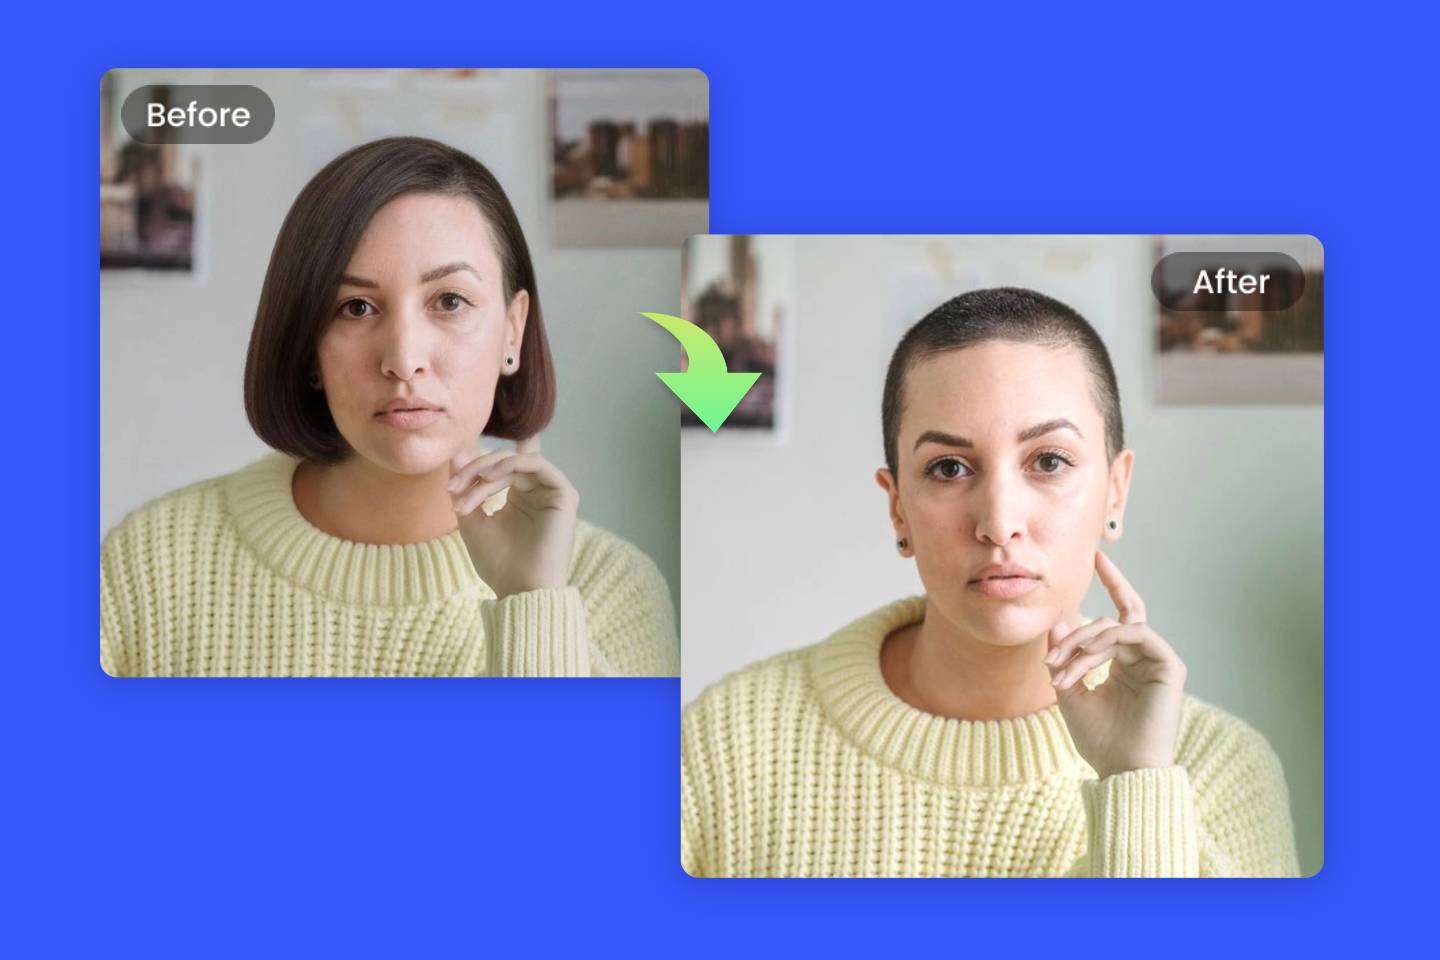 Use fotor online buzz cut filter to transform female bob hairstyle into buzz cut